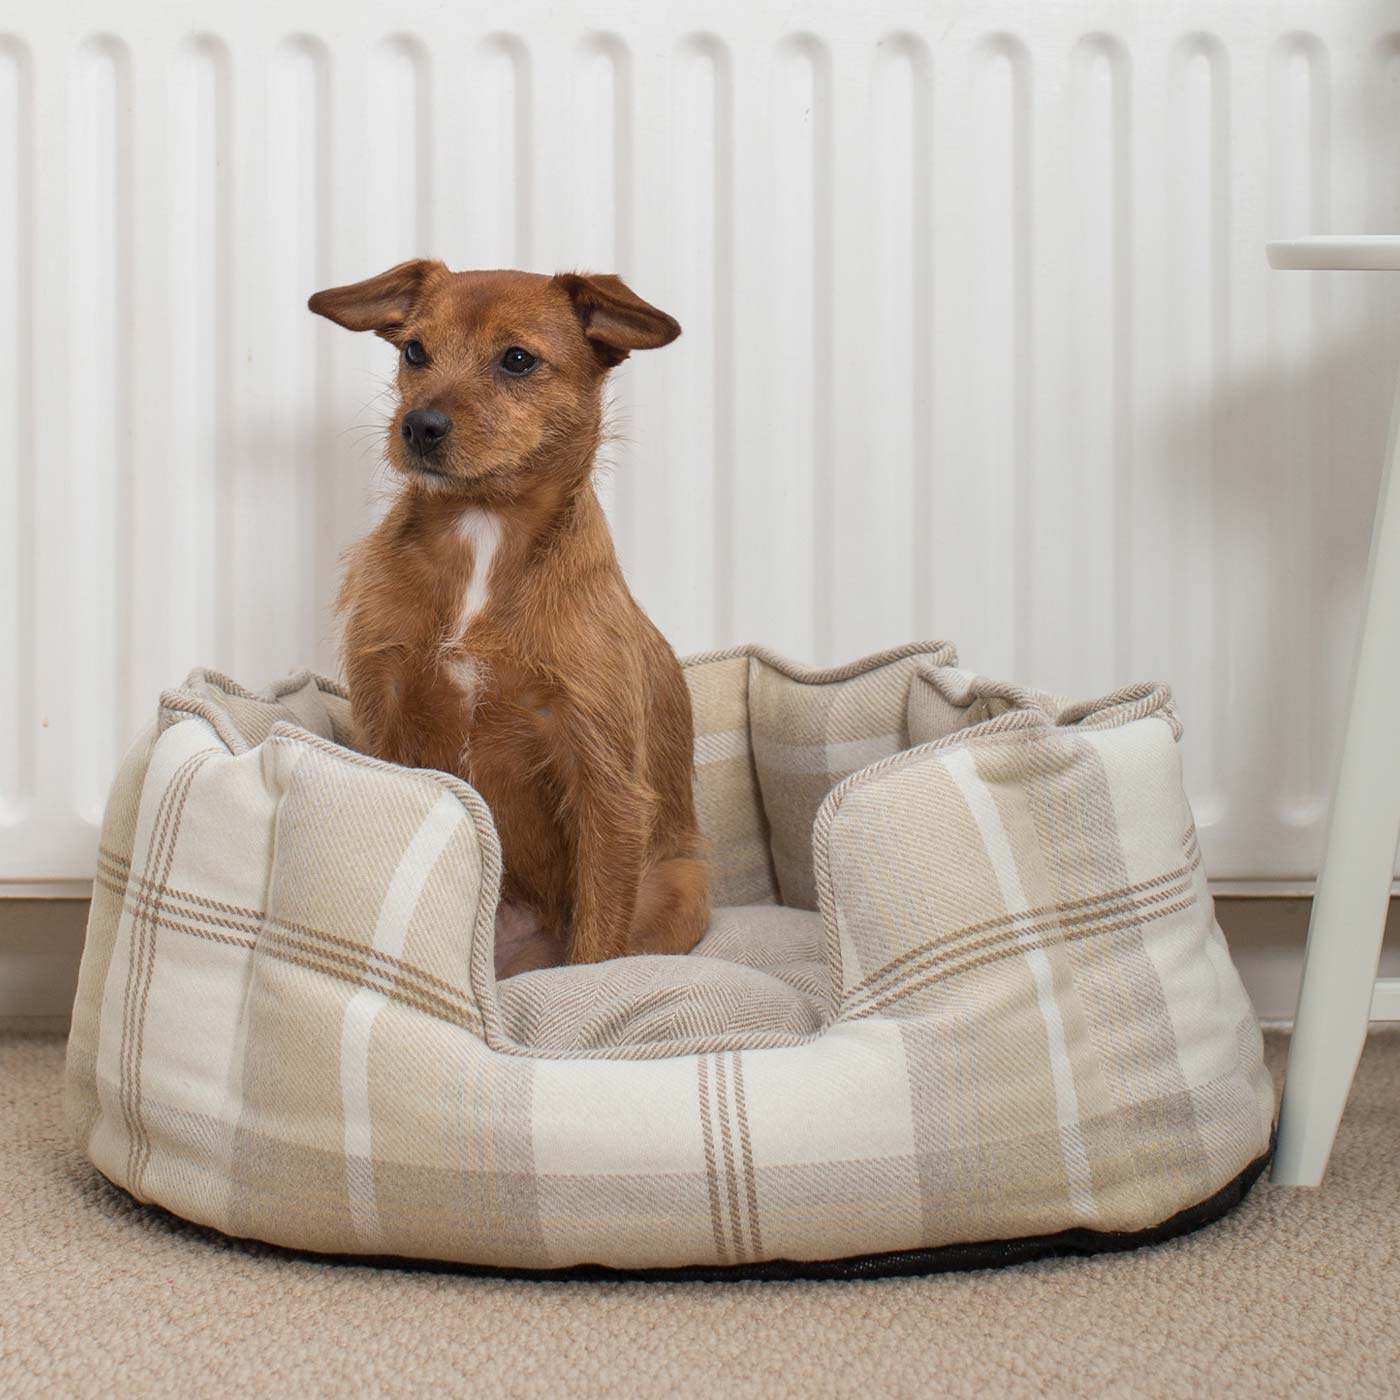 Discover Our Luxurious High Wall Bed For Dogs, Featuring inner pillow with plush teddy fleece on one side To Craft The Perfect Dogs Bed In Stunning Natural Tweed! Available To Personalize Now at Lords & Labradors US